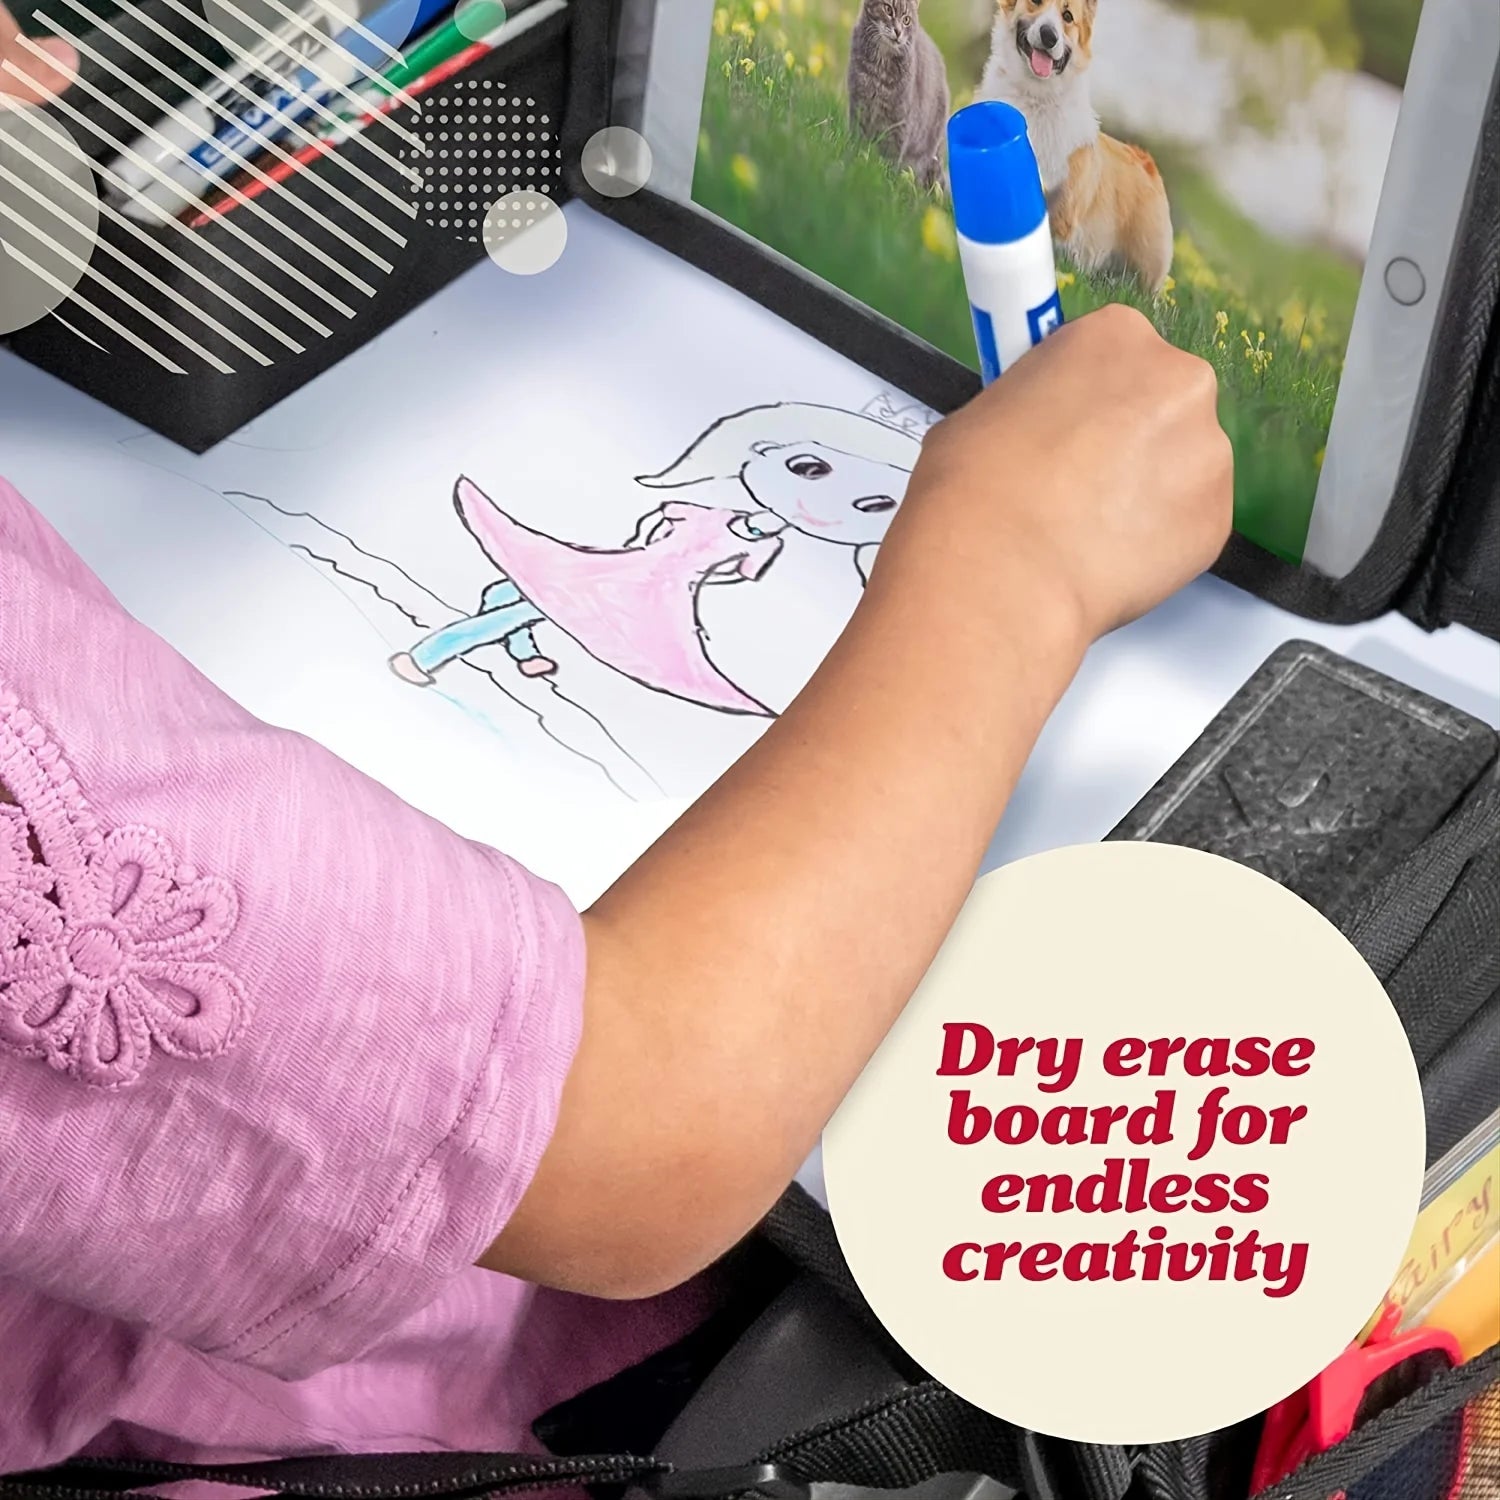 Road Trip Essentials Kids Travel Tray, For Car Seats Large Activity Lap Tray Table Pocket Organizer Loved By Toddlers, Kids